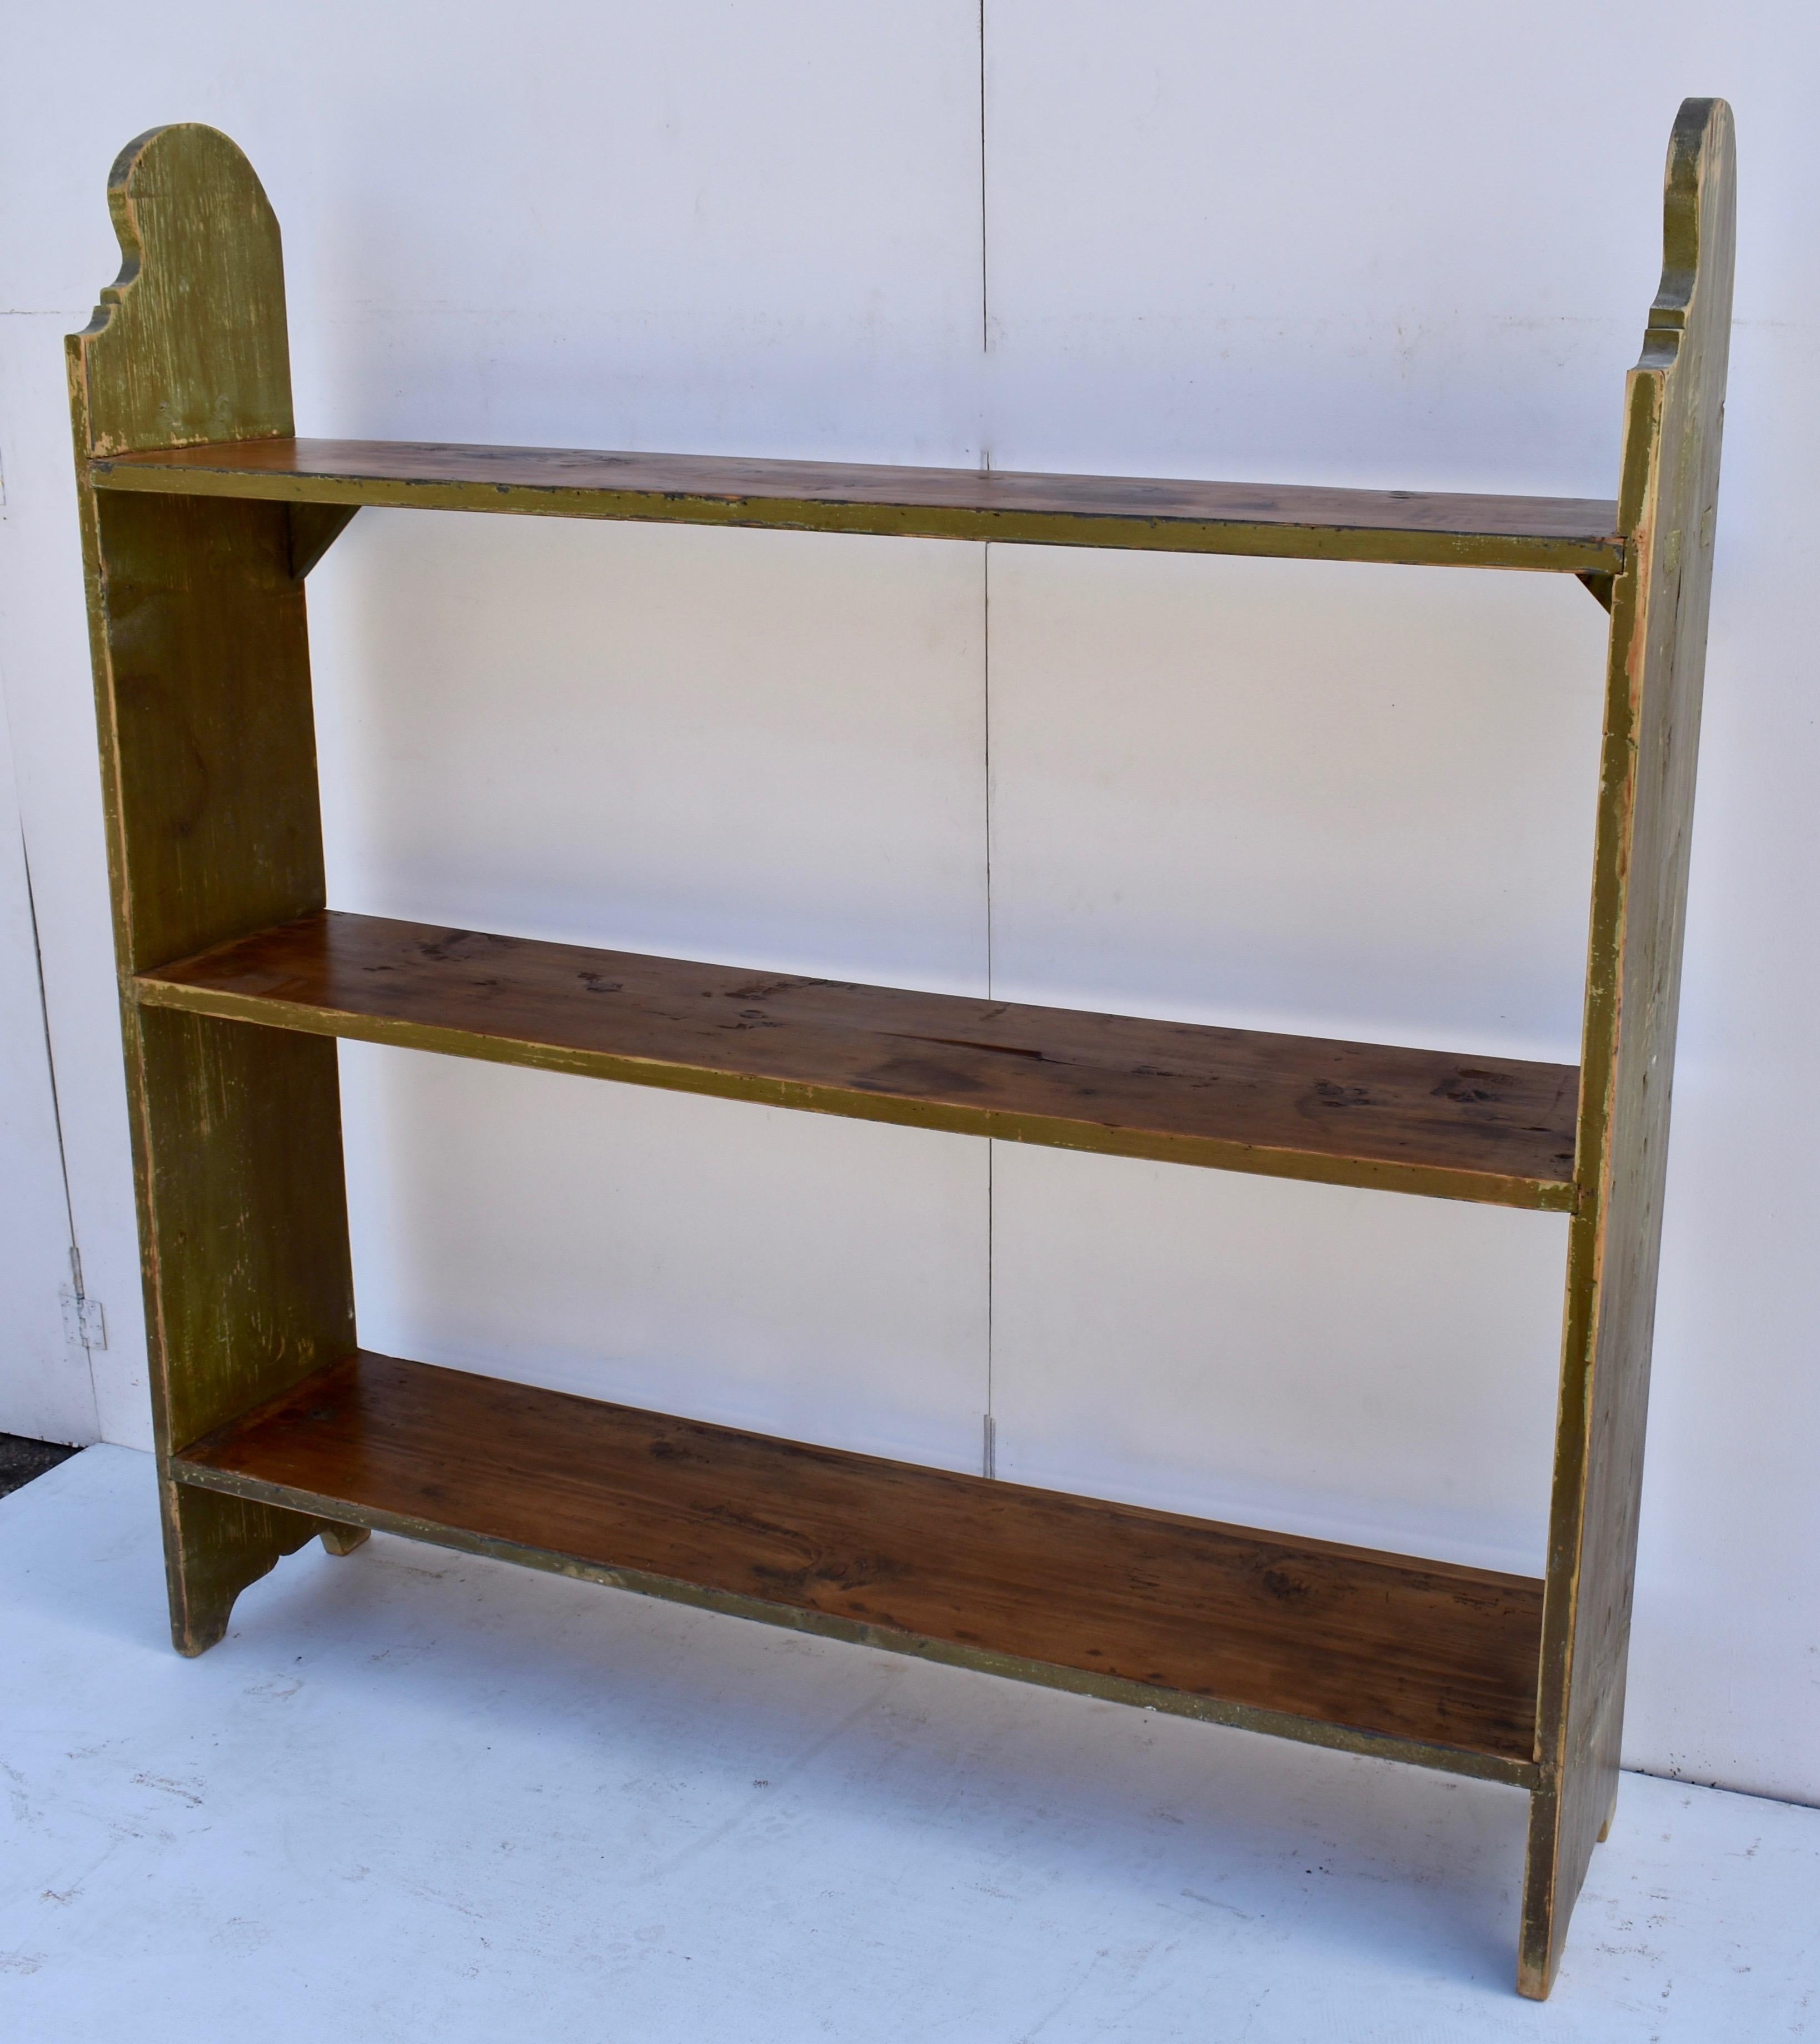 Hungarian Painted Pine Bucket Bench or Utility Shelves For Sale